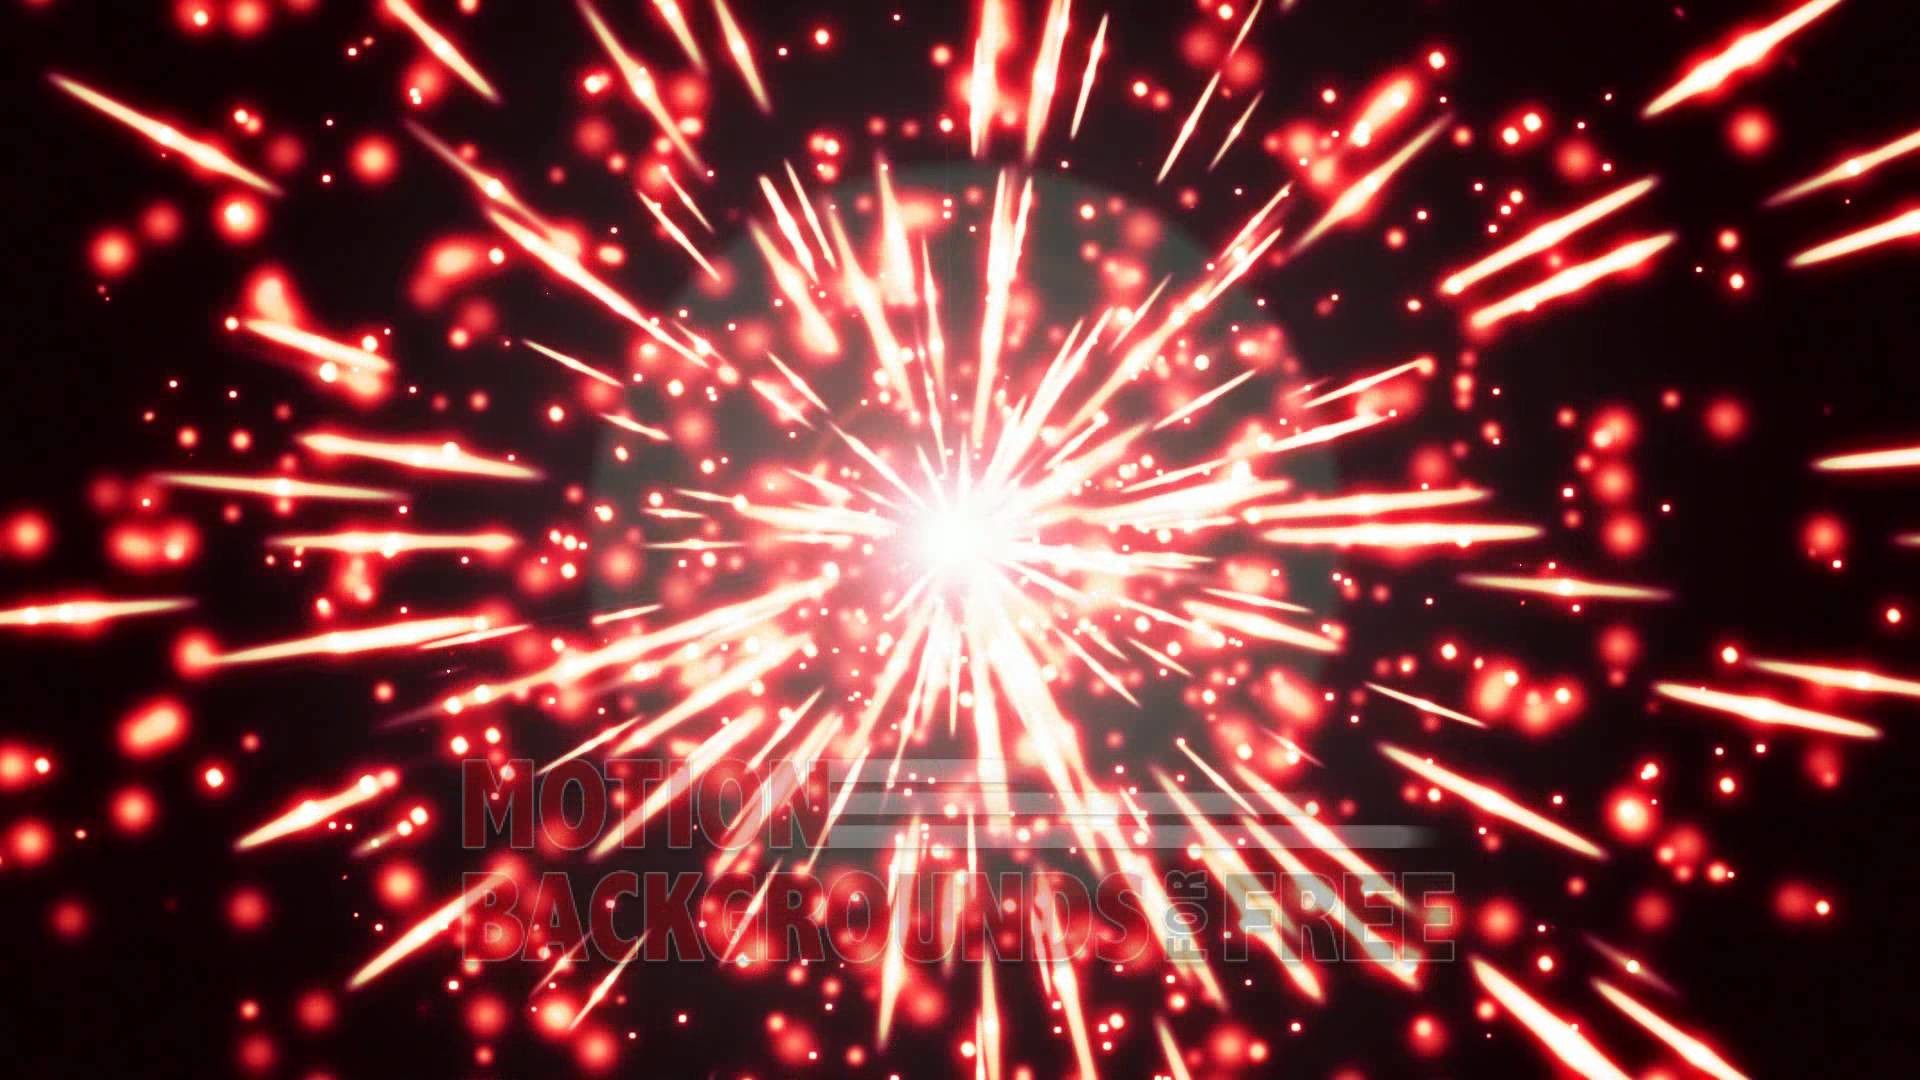 1920x1080 Free Light and Energy Motion Background "Red Fireworks"